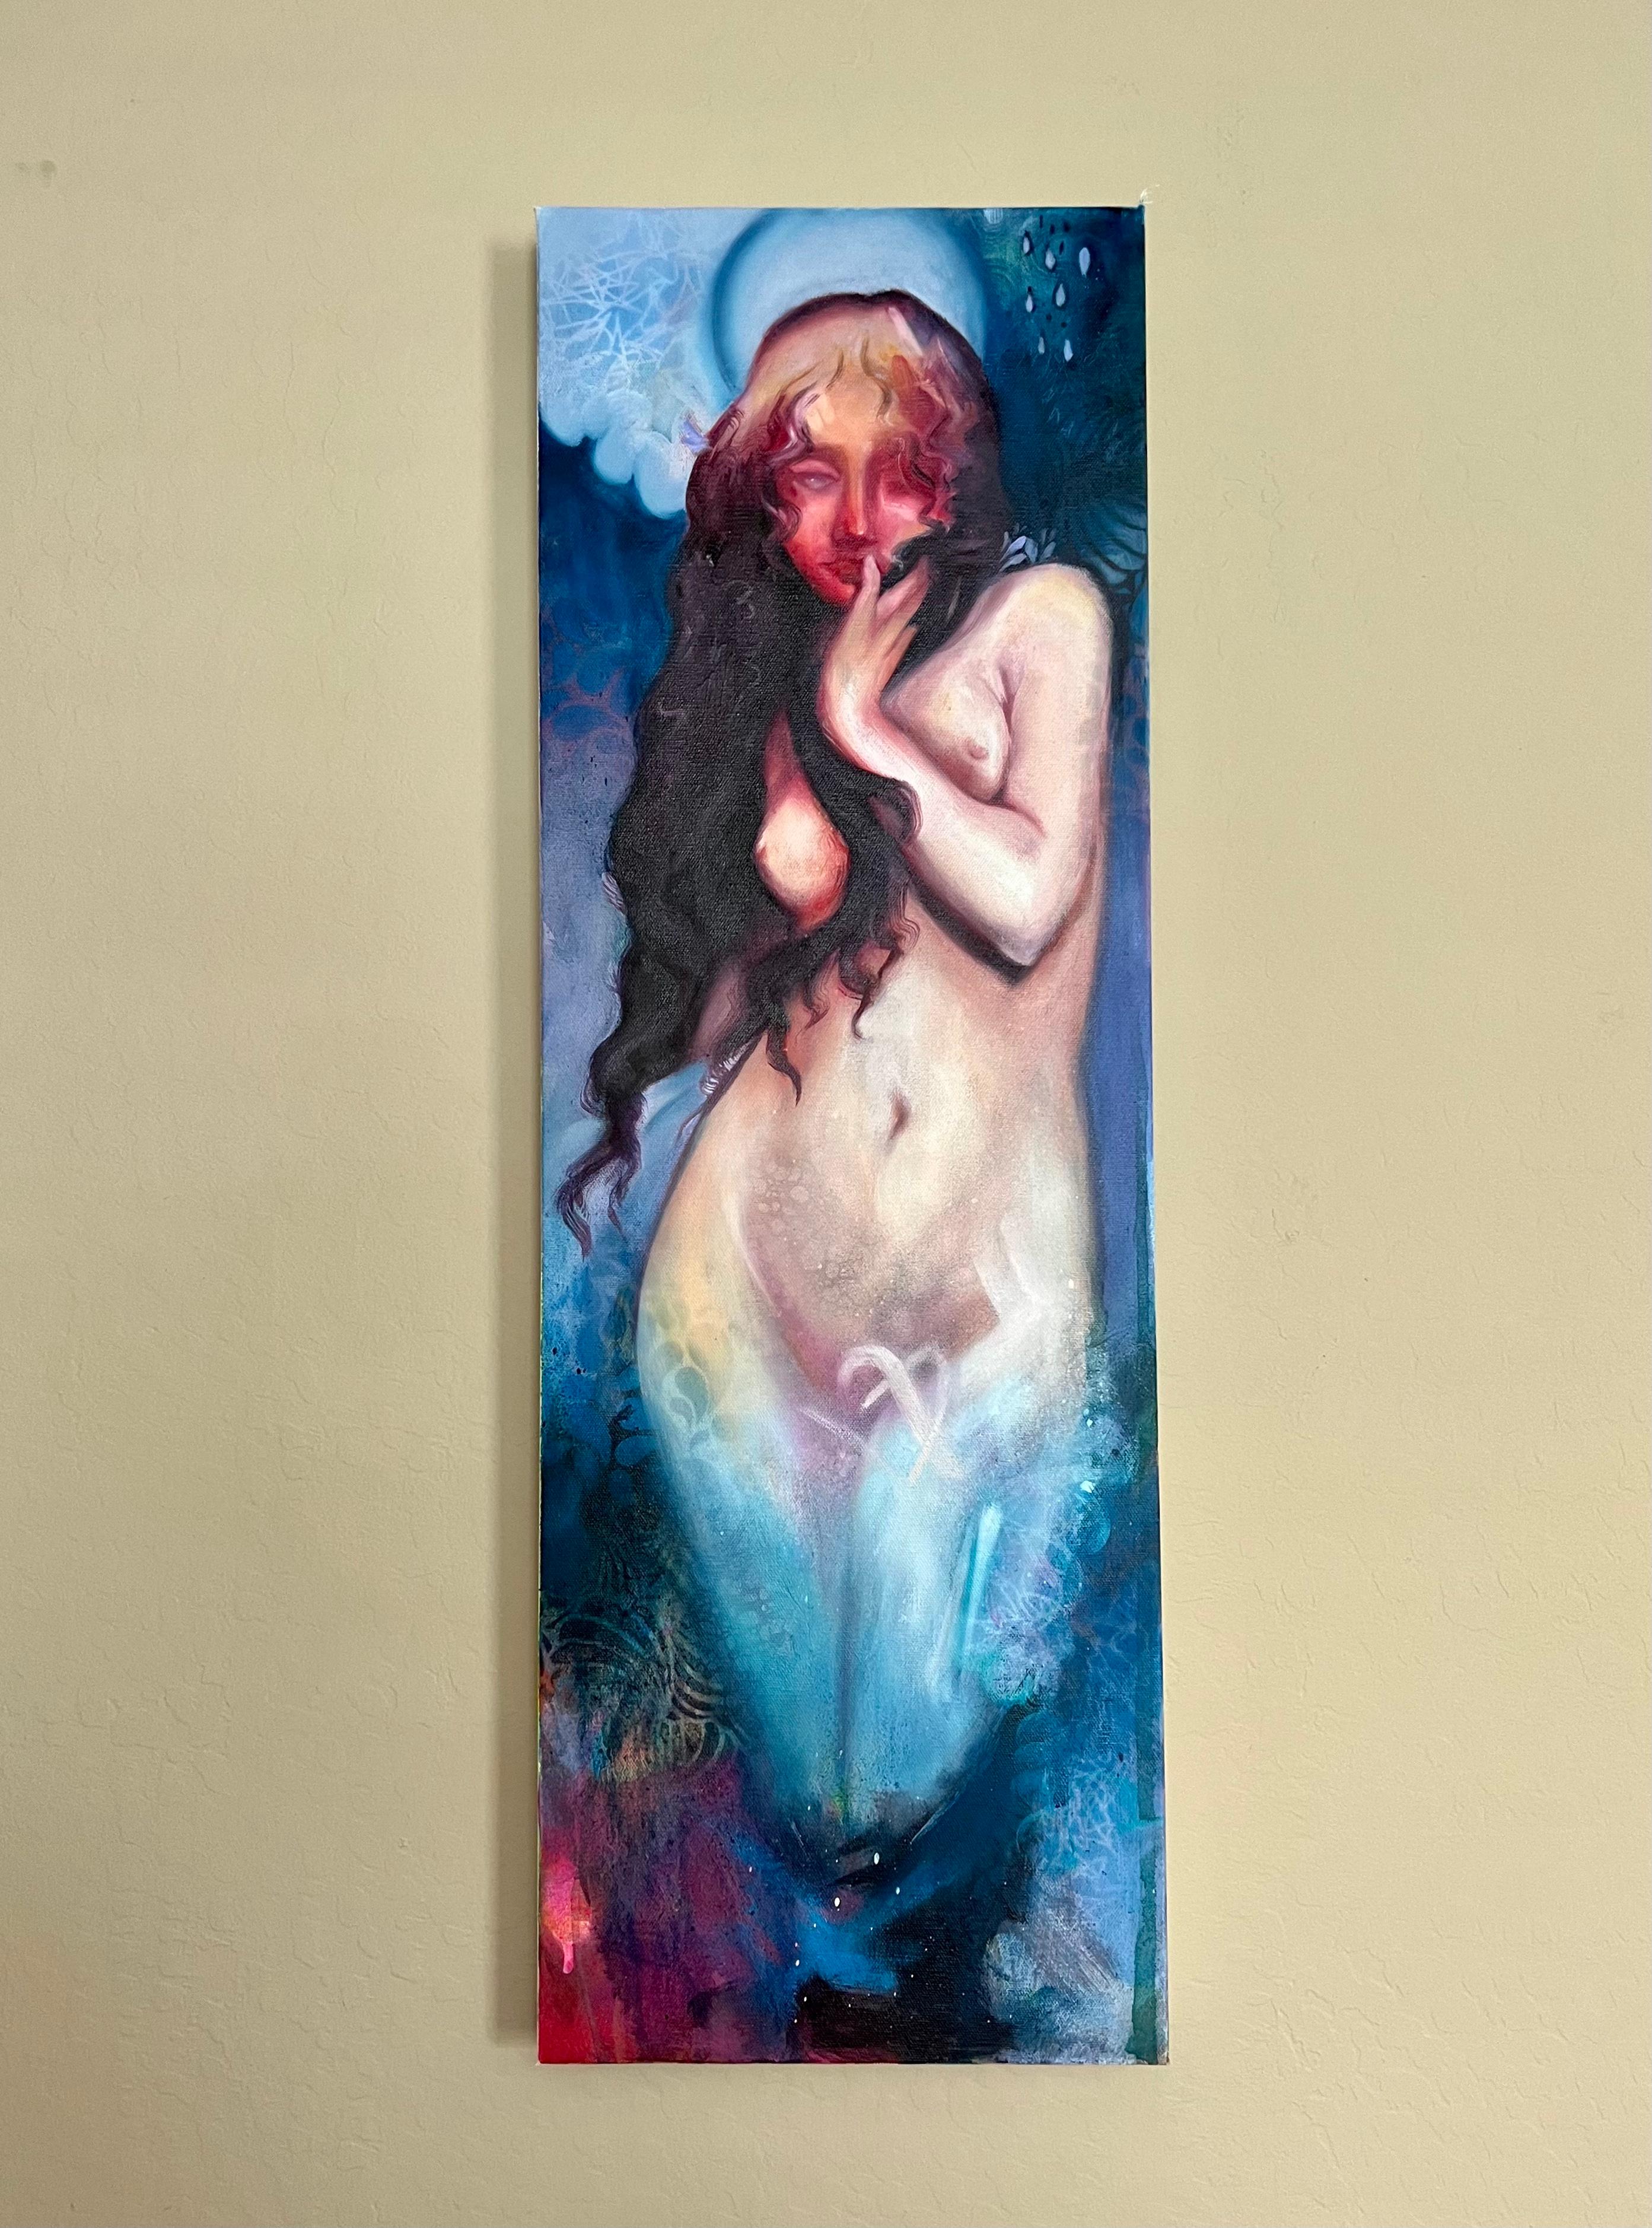 <p>Artist Comments<br>Inspired by the classical painting, The Birth of Venus, artist Miranda Gamel shows a surrealist portrayal. The subject stands beautifully with long wavy hair and glistening eyes under a turquoise moon. Miranda integrates